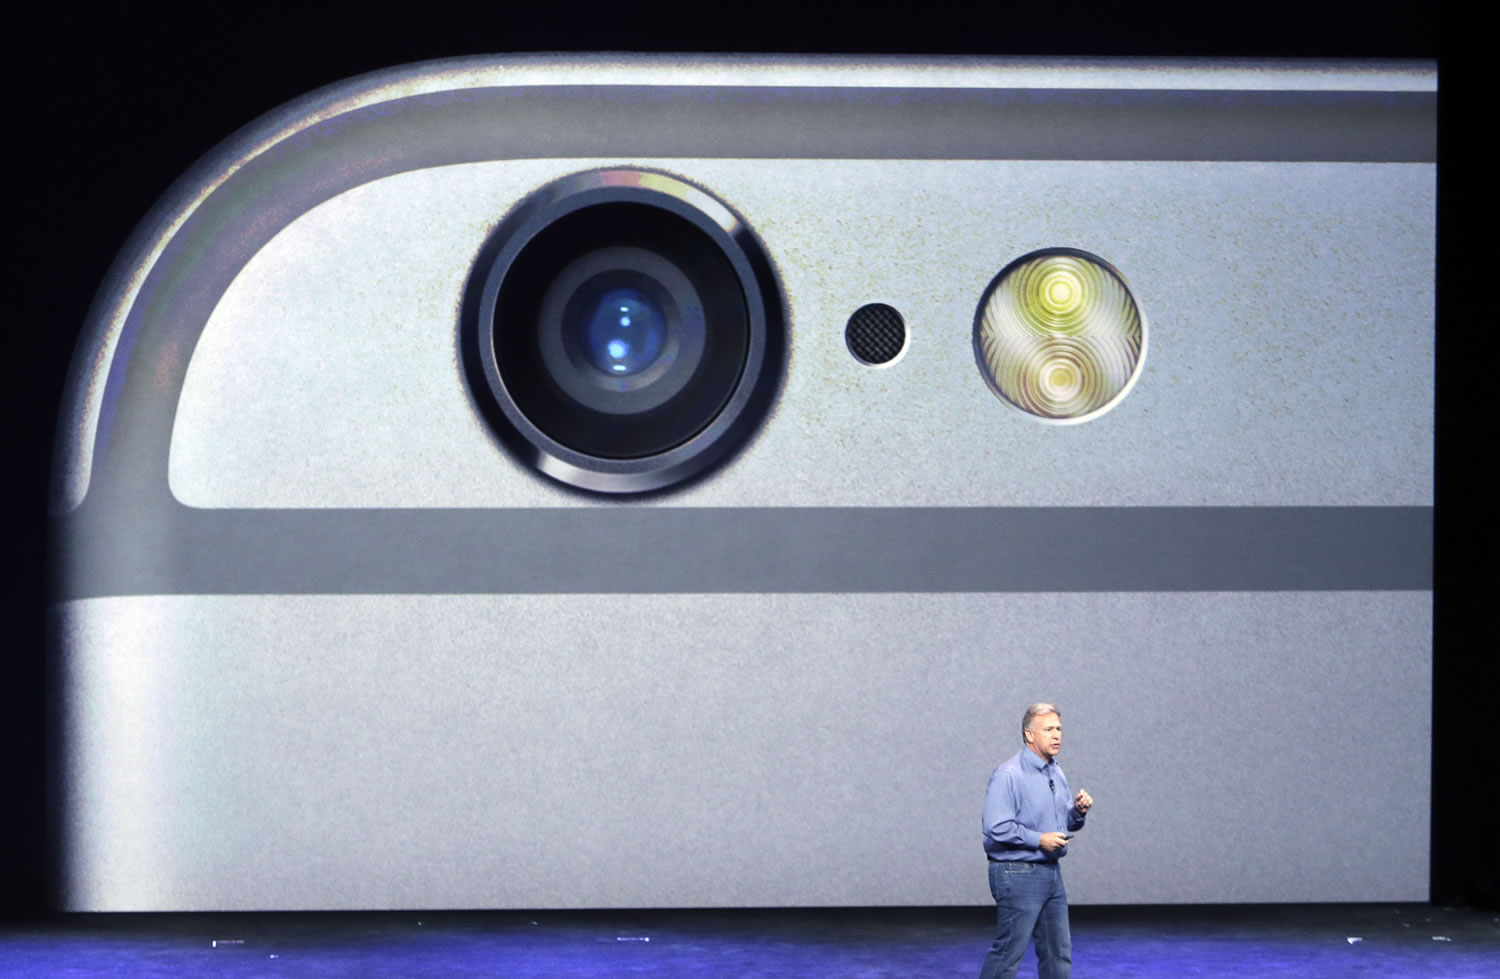 Phil Schiller, Apple's senior vice president of worldwide product marketing, discusses the camera features on the new iPhone 6 and iPhone 6 Plus.